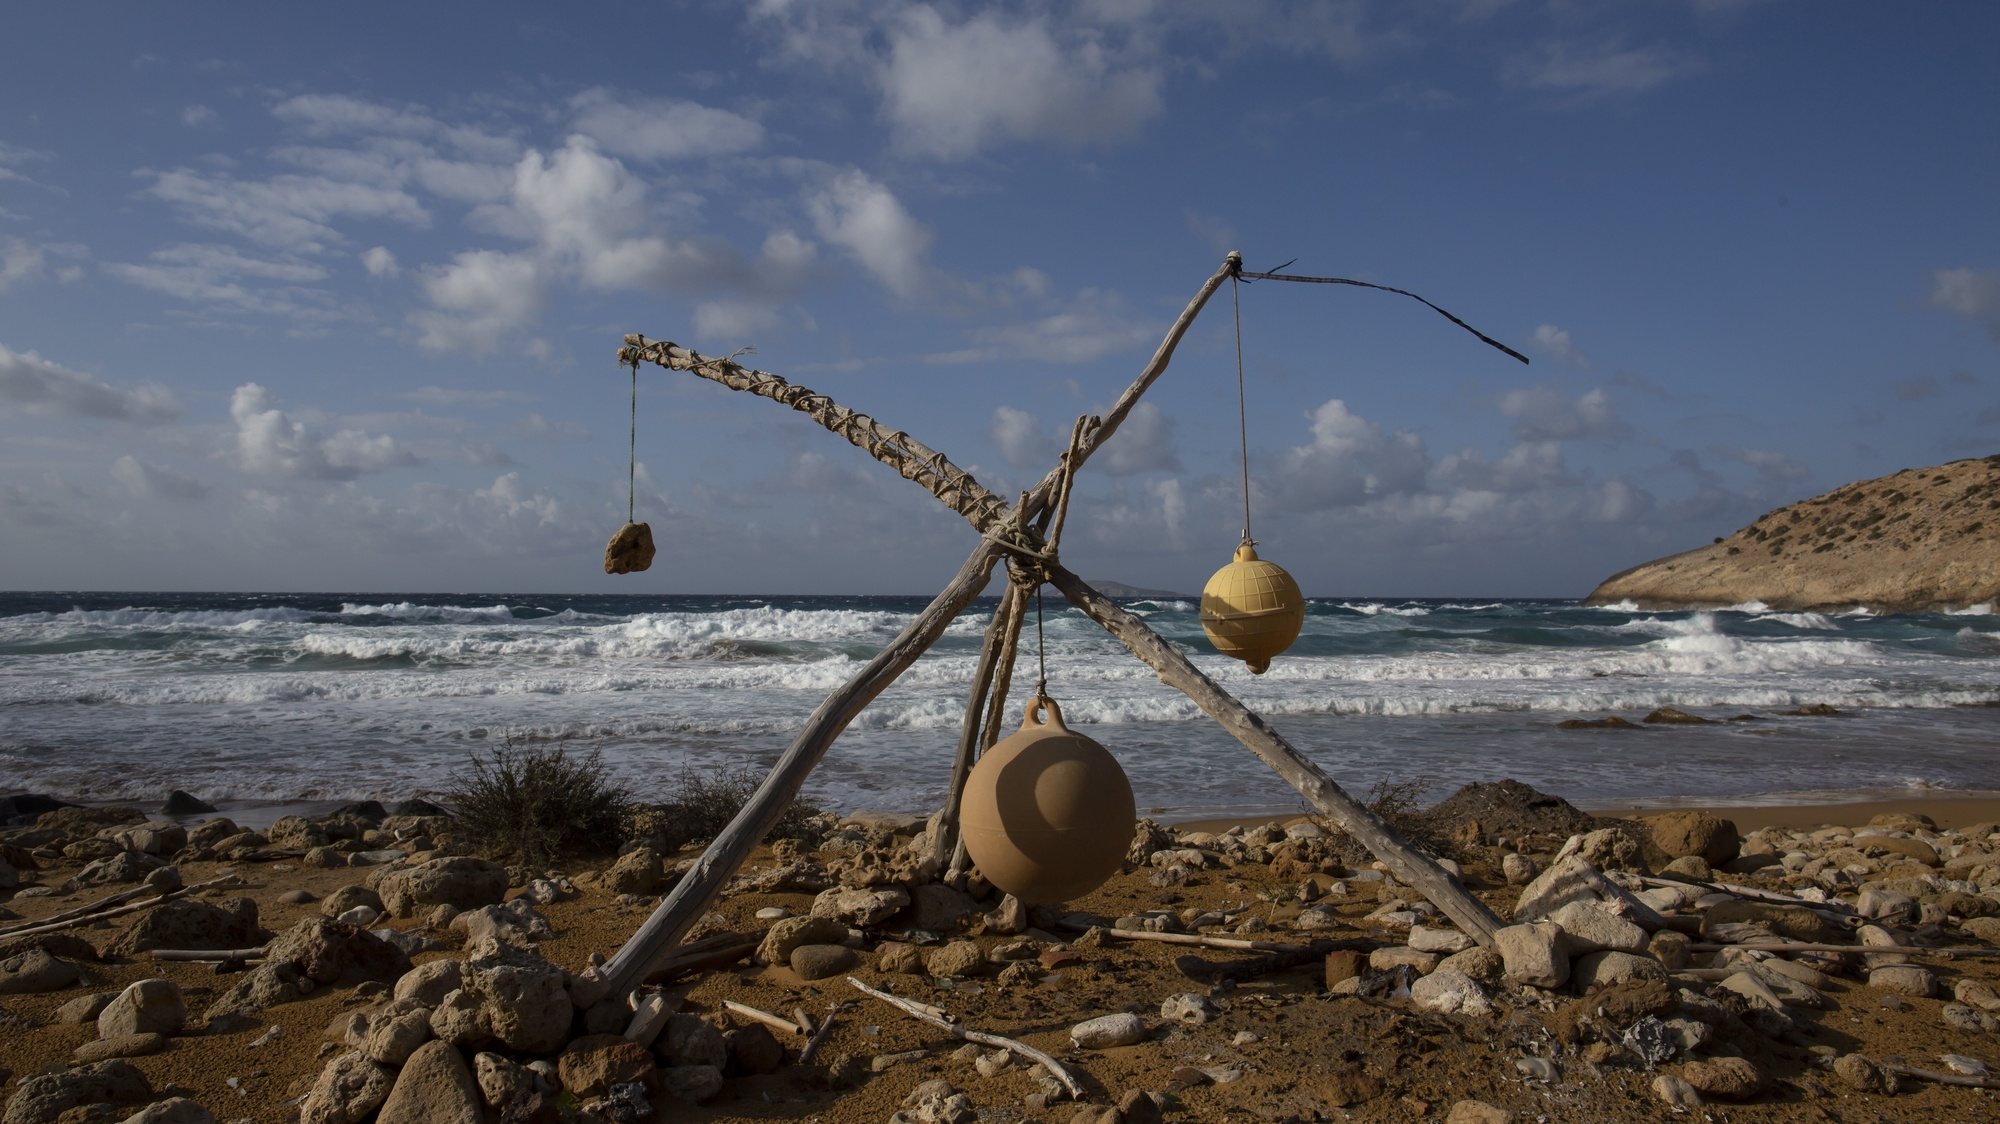 epa08856597 (26/29) Hanging stones and small buoys on pieces of wood, made by campers, stand at a beach on the island of Gavdos, Wednesday, January 29, 2020. As the island is a world-renowned summer destination for free campers. Many of them continue to live on beaches the rest of the year.  EPA/YANNIS KOLESIDIS